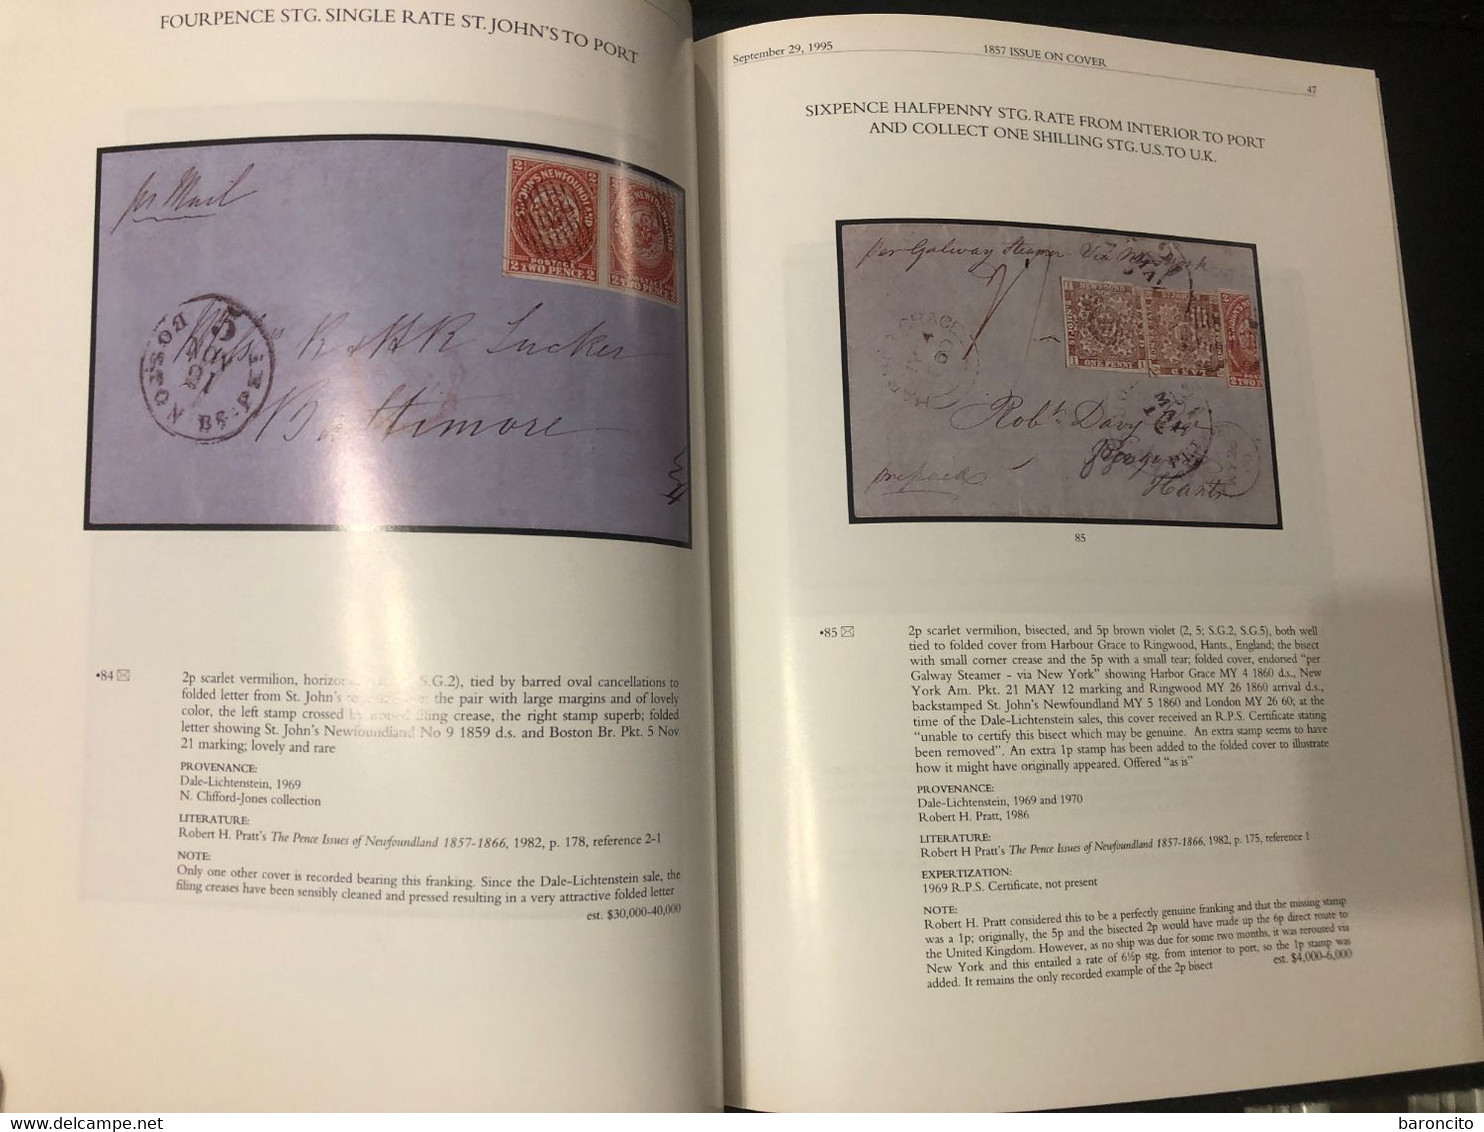 CATALOGO D'ASTA CHRISTIE'S - POSTAGE STAMPS AND POSTAL HISTORY OF NEWFOUNDLAND. SEPT. 1995 - Catalogues For Auction Houses